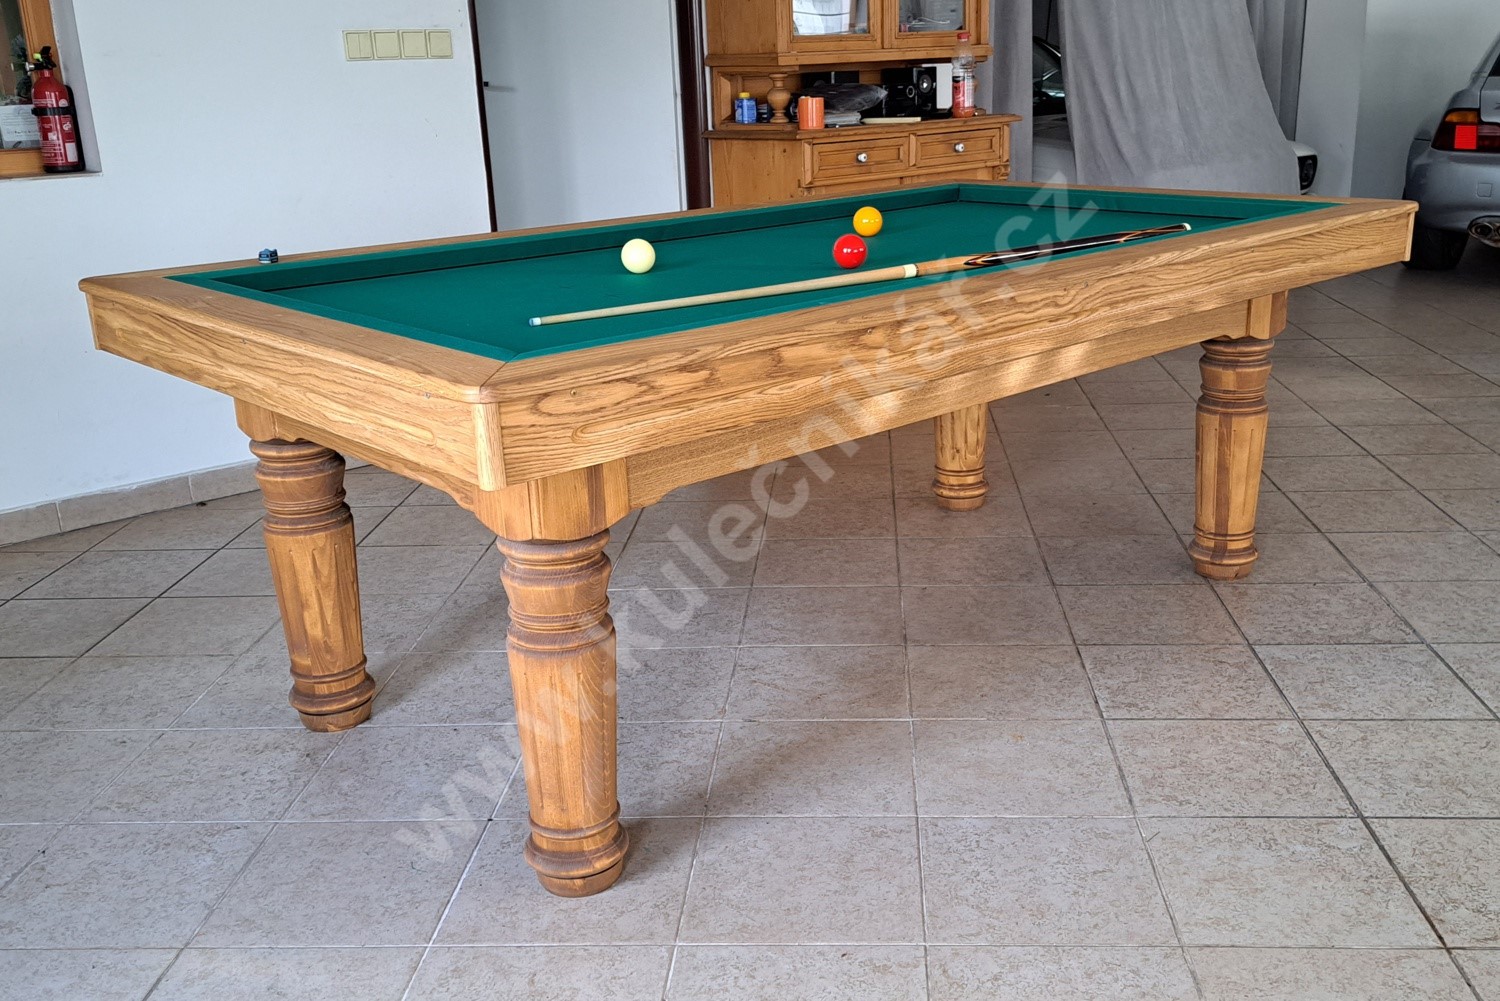 Carom Table Cushion Rubber